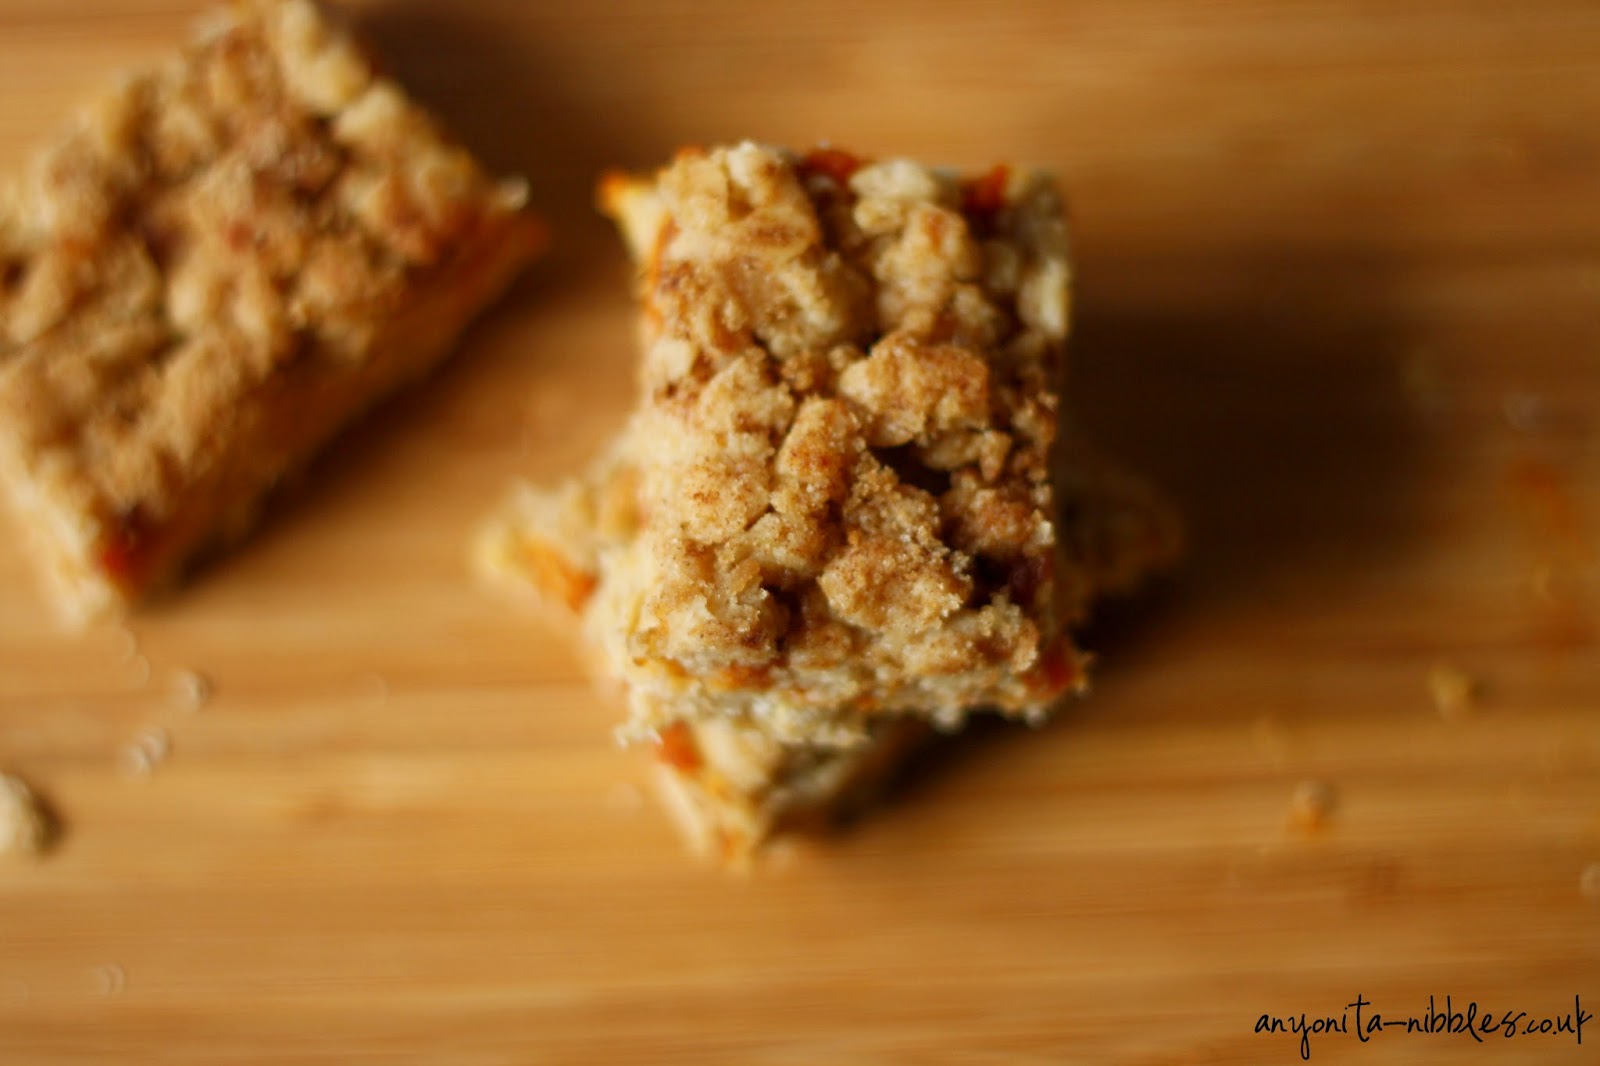 Three gluten free pumpkin oat bars, perfect for Thanksgiving breakfast! From Anyonita-nibbles.co.uk